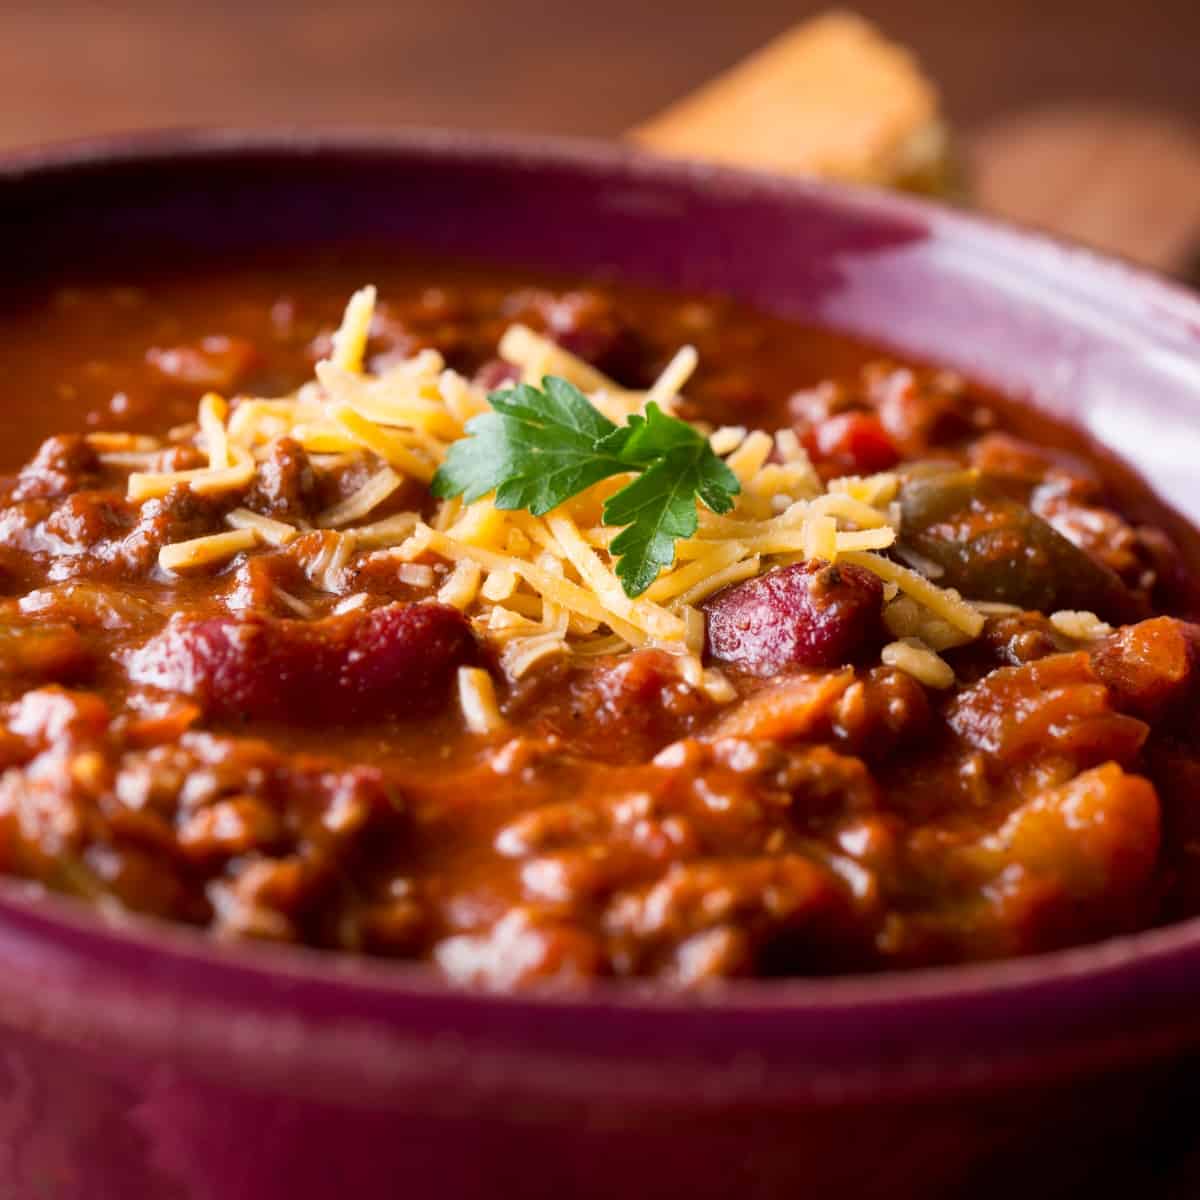 What is chili